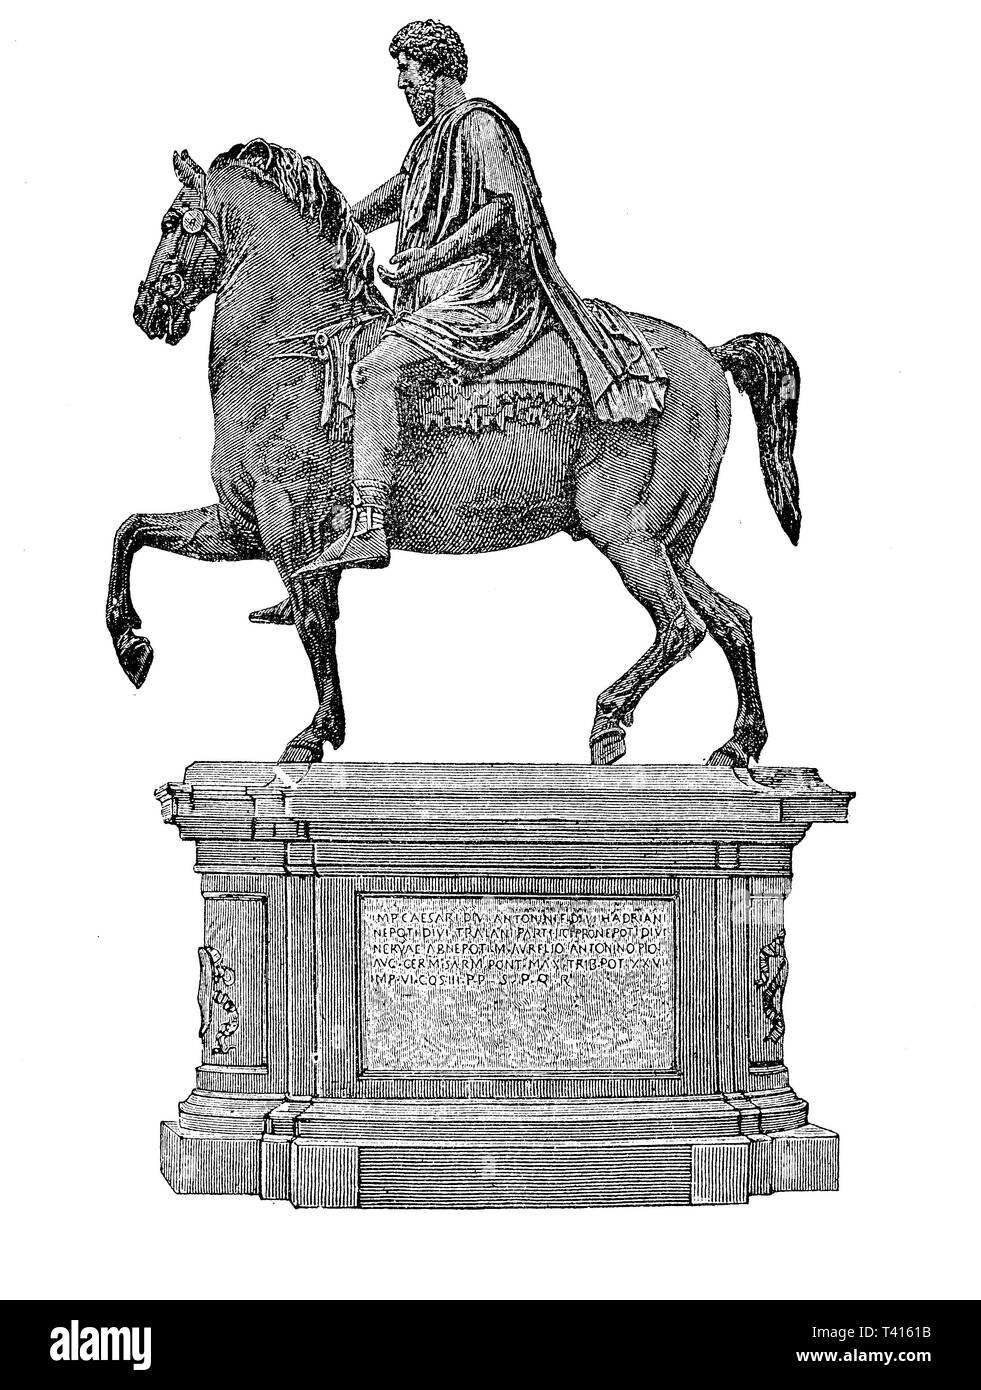 Equestrian Statue of Marcus Aurelius: ancient Roman statue (ca 175 AD) made of bronze in the Capitoline Museums in Rome. The statue was create to celebrate the victory over the Sarmatians by the emperor. Stock Photo